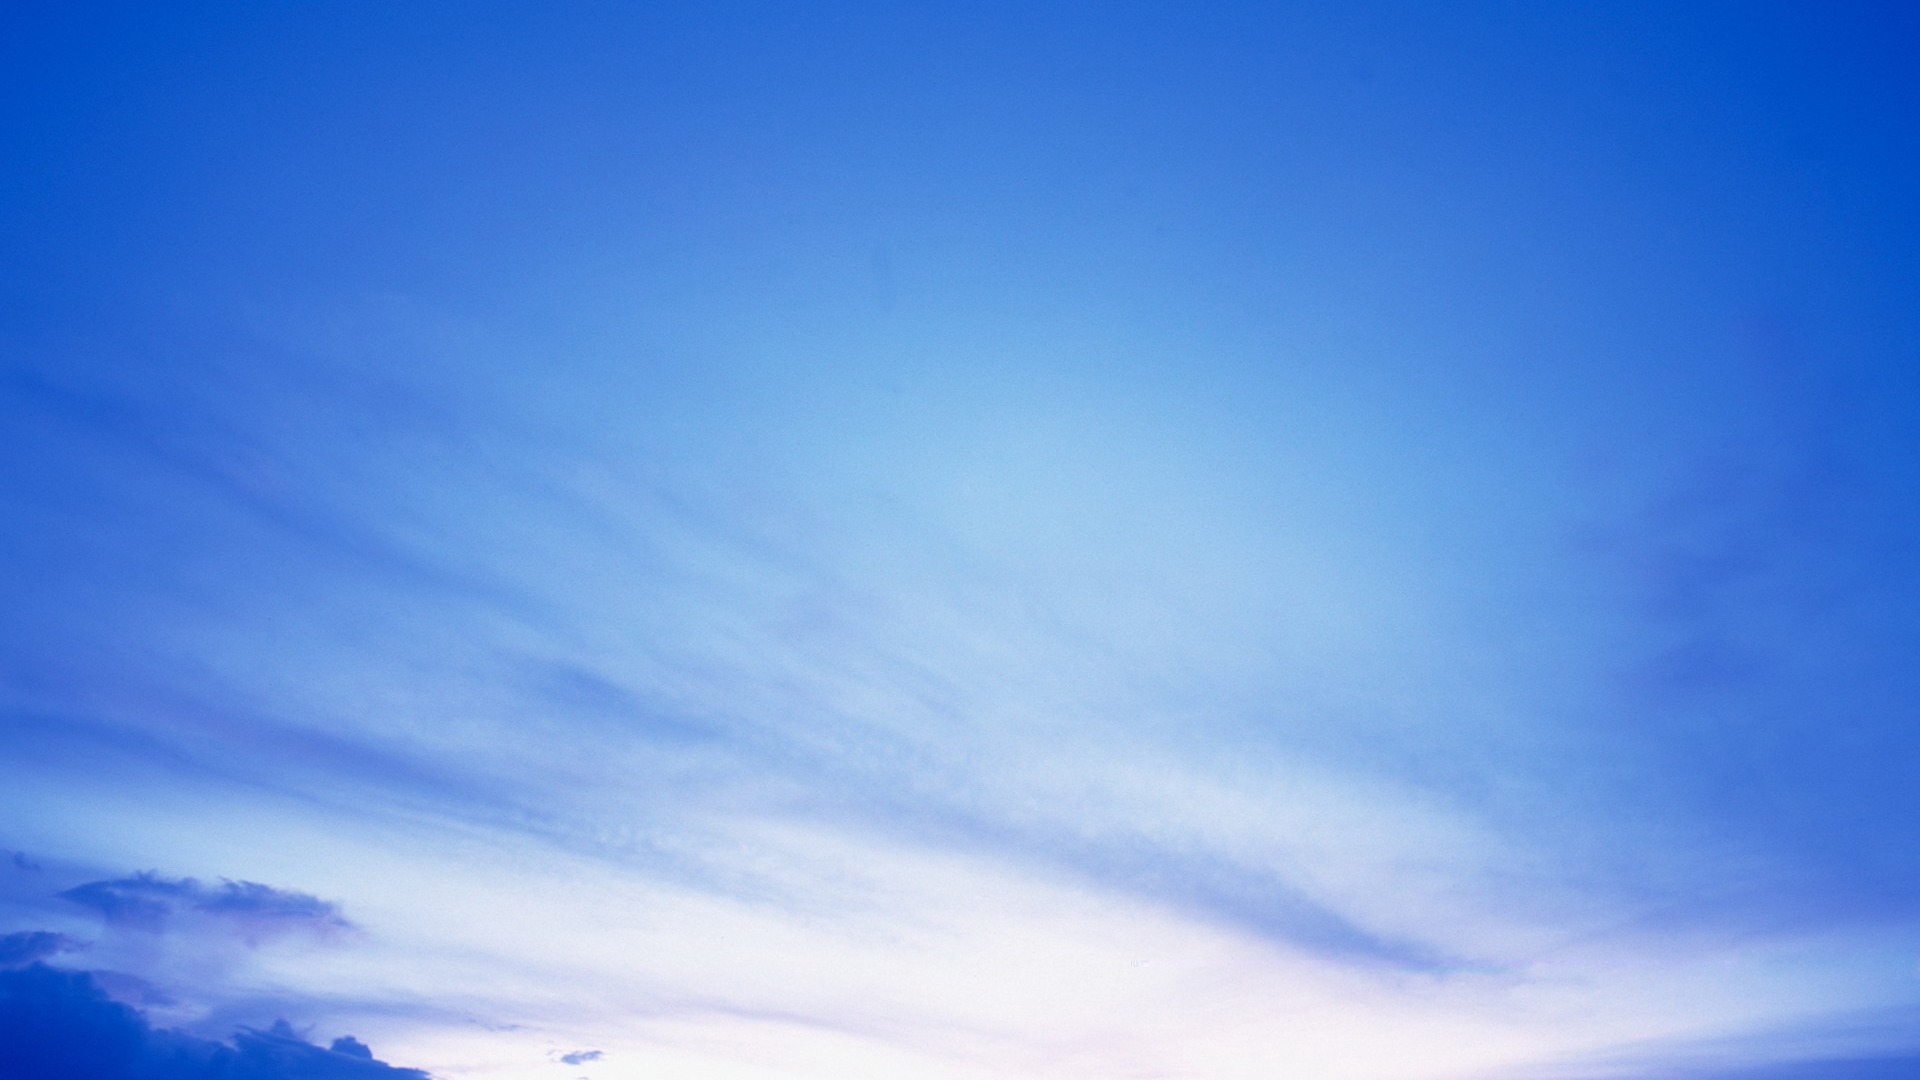 Collection of Blue Sky Wallpaper on HDWallpapers.